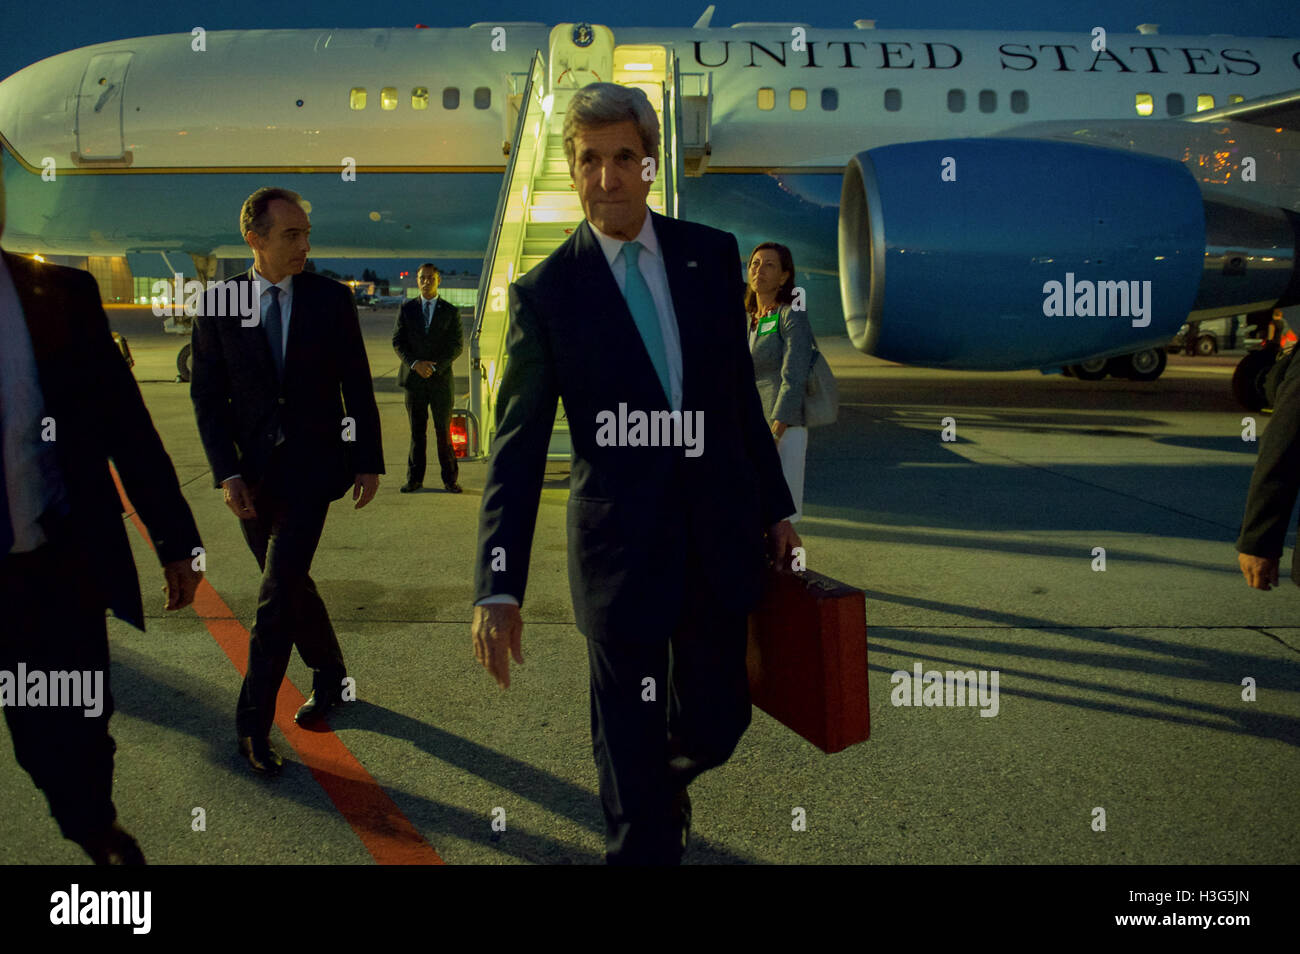 U.S. Secretary of State John Kerry walks away from his aircraft on September 9, 2016, after he arrived at the Geneva Airport in Geneva, Switzerland, following an overnight flight from Washington for meetings with Russian Foreign Minister Sergey Lavrov focused on Syria. Stock Photo